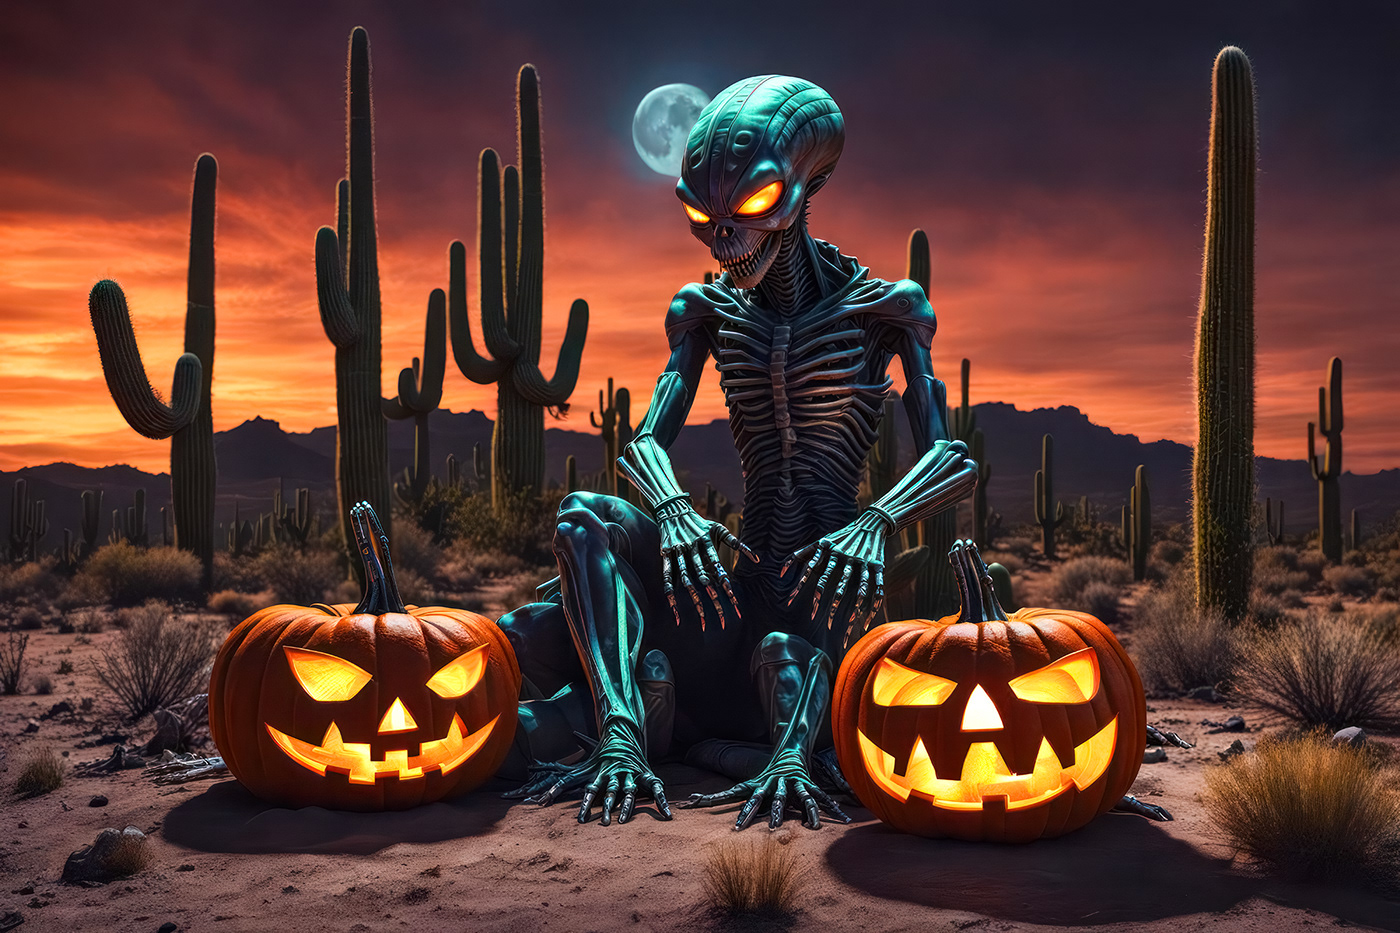 The Desert Southwest Cryptids are working away on their jack o lanterns in preparation for Halloween